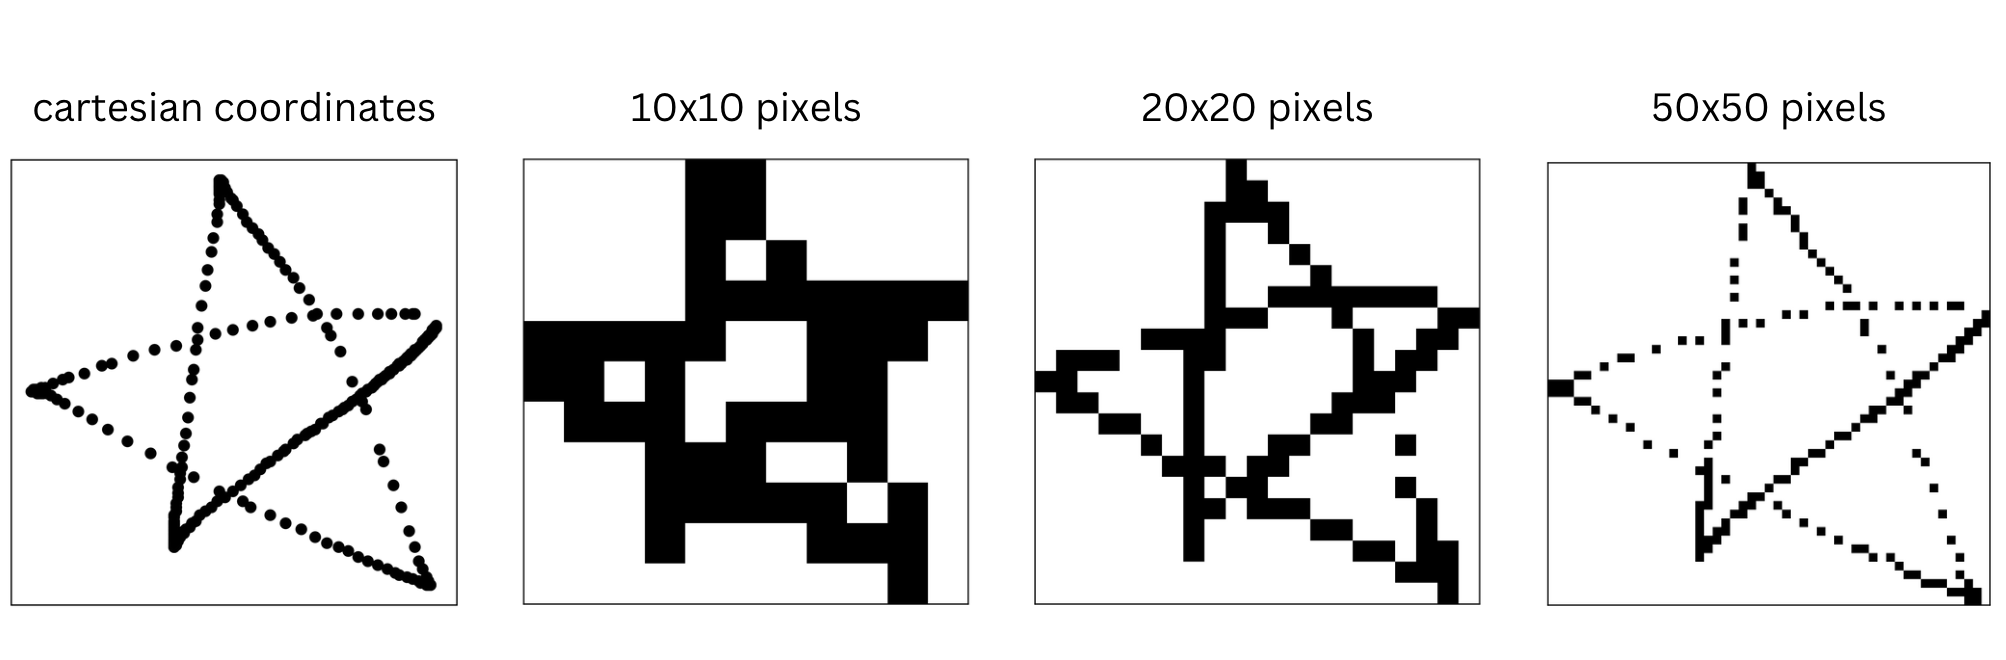 Comparison of the Cartesian coordinate system versus pixels in varying resolutions